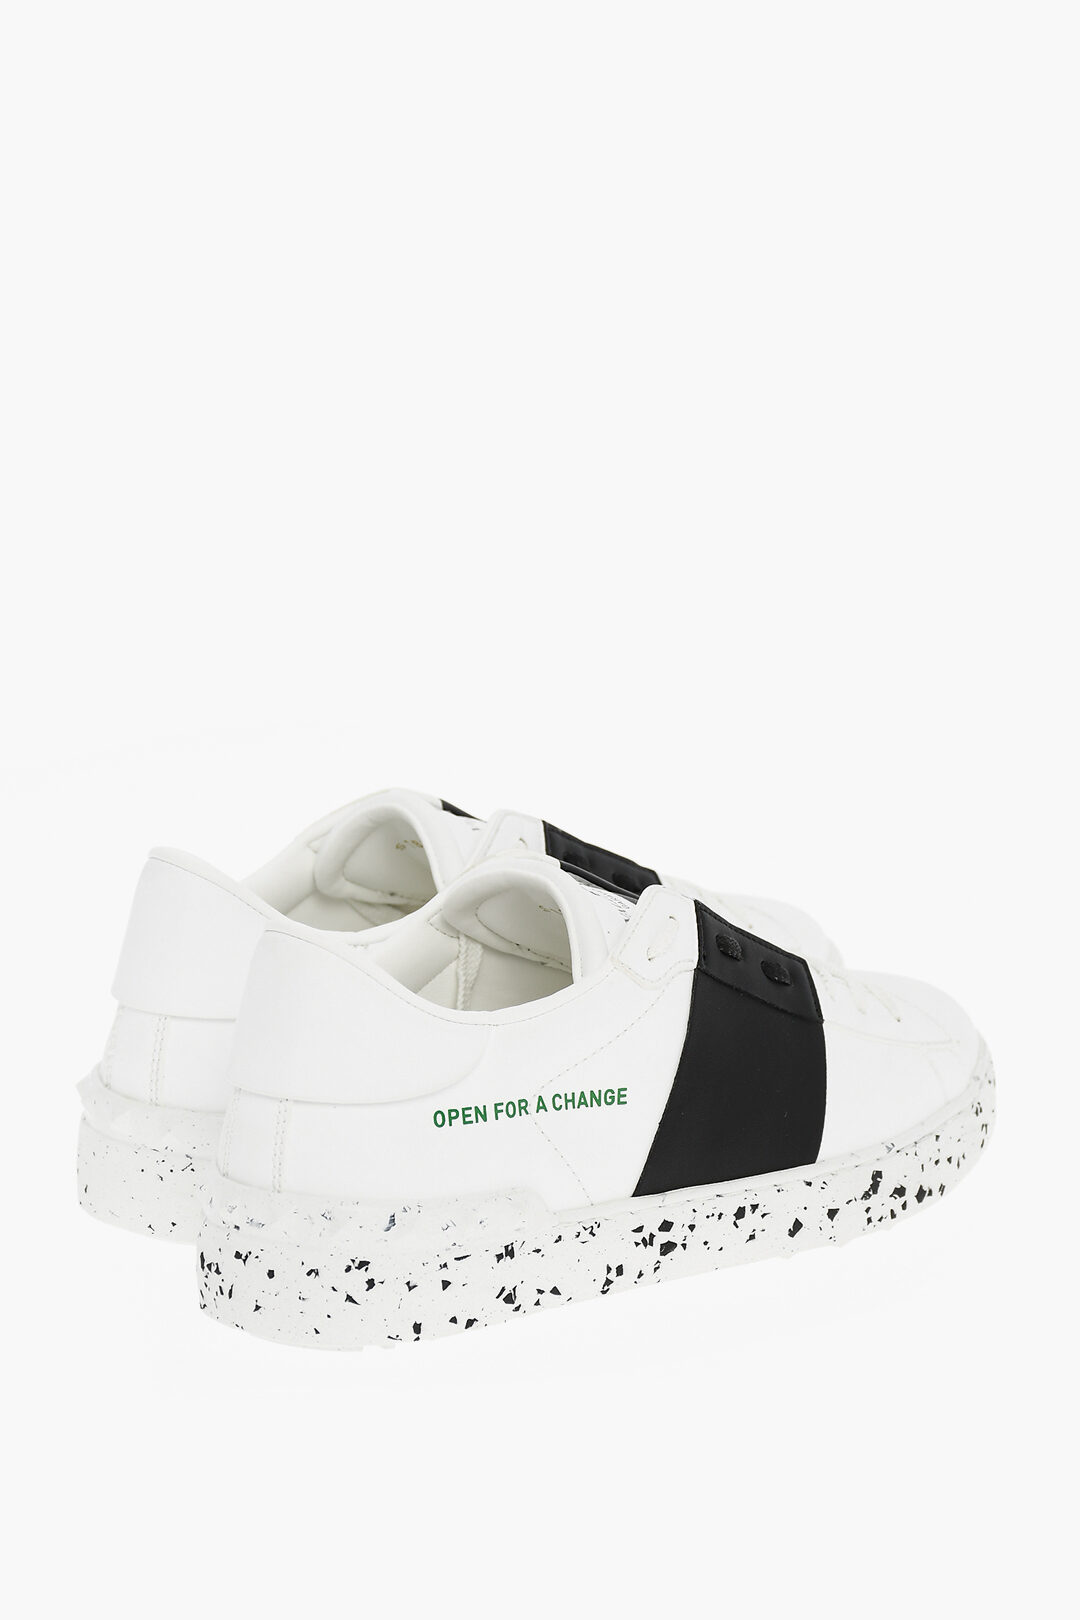 Repressalier champignon Vellykket Valentino Contrasting Band Low-Top Sneakers men - Glamood Outlet